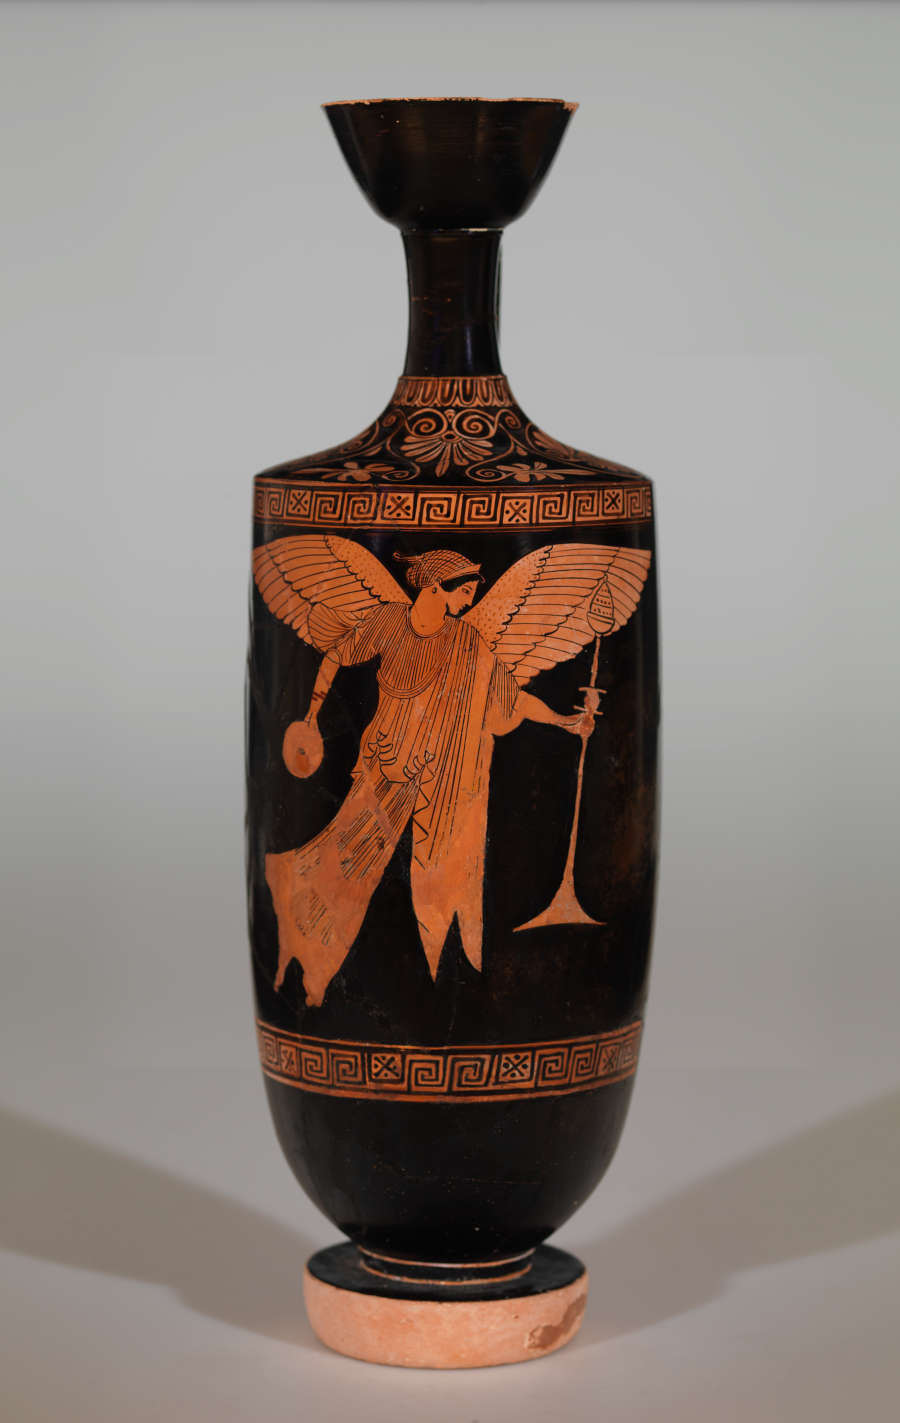 Vessel with an elongated, flared neck. Black background has an orange design with a winged figure holding a trumpet in one hand and a vessel in the other.